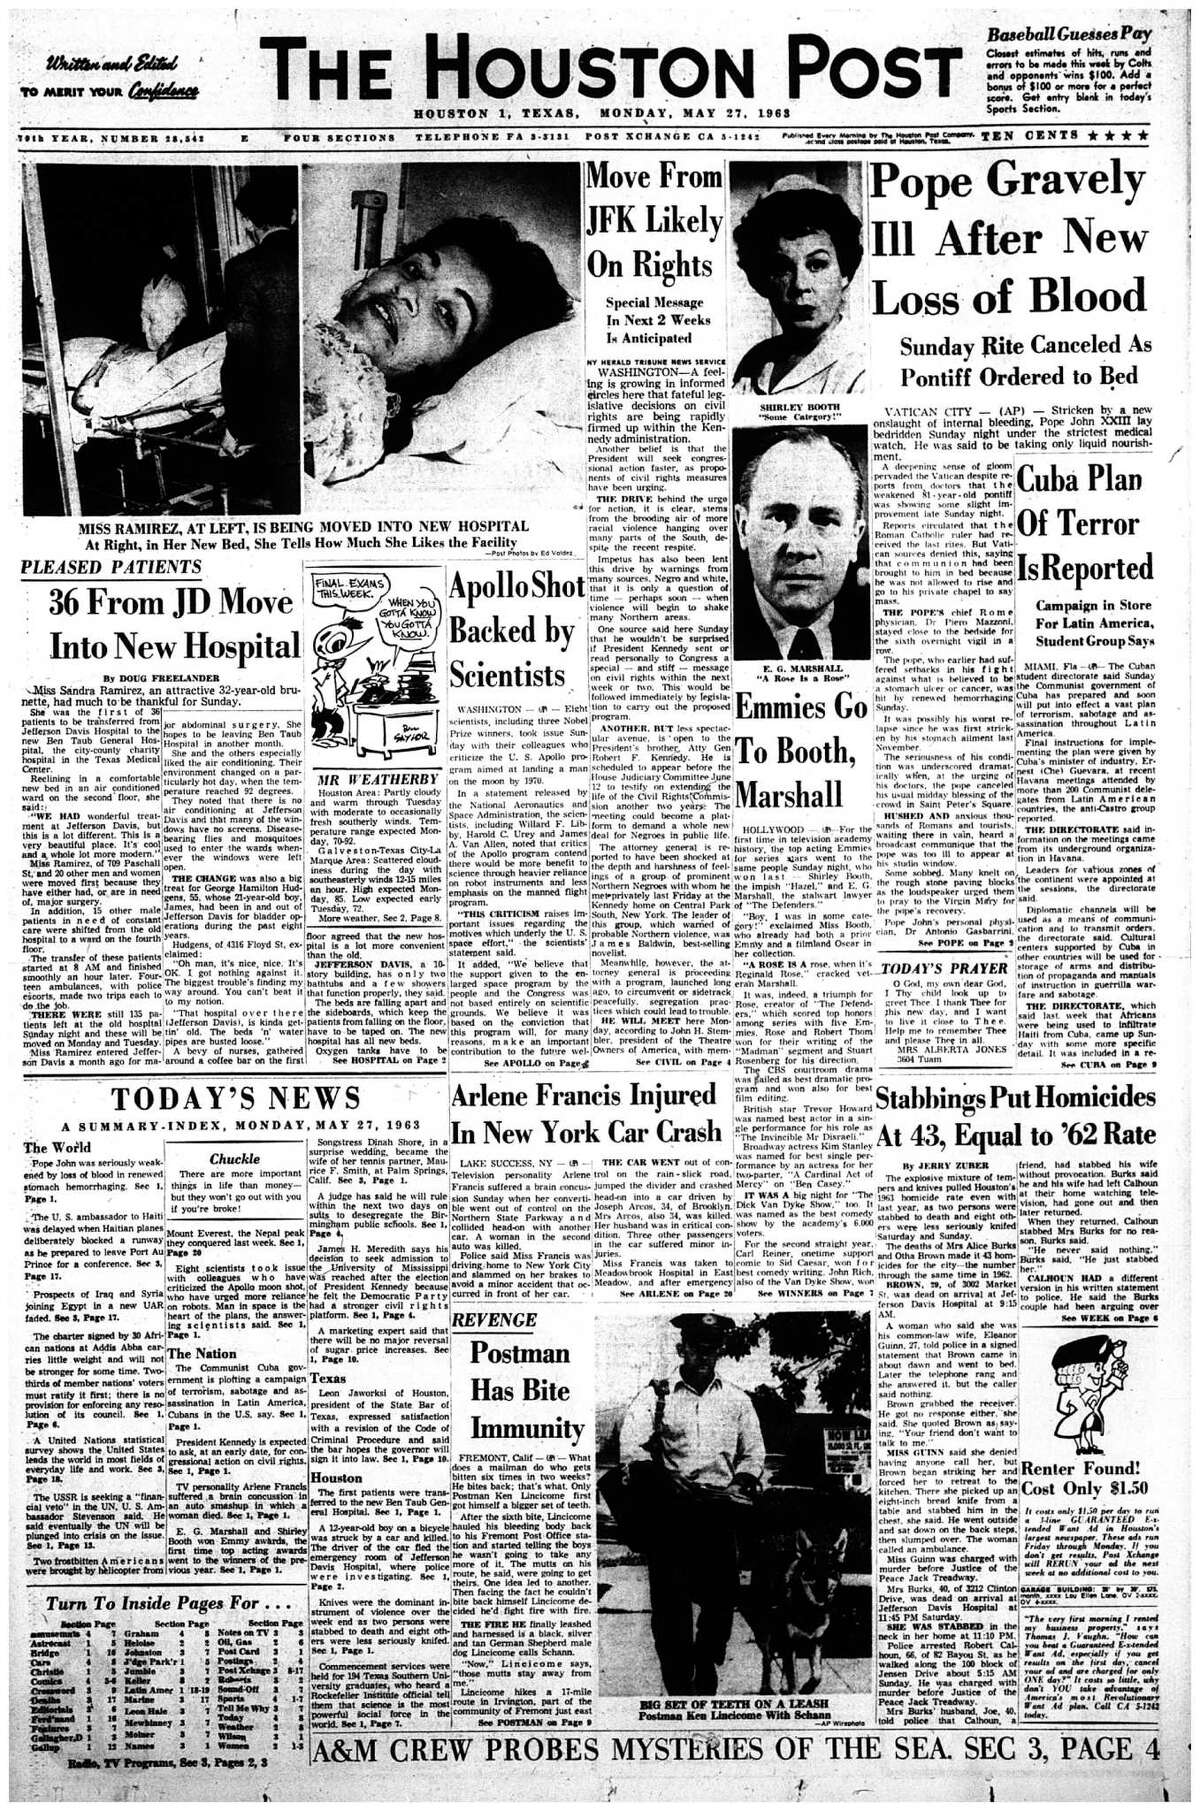 Houston Post front page: May 27, 1963 - section 1, page 1. PLEASED PATIENTS 36 From JD Move Into New Hospital (Ben Taub Hospital)